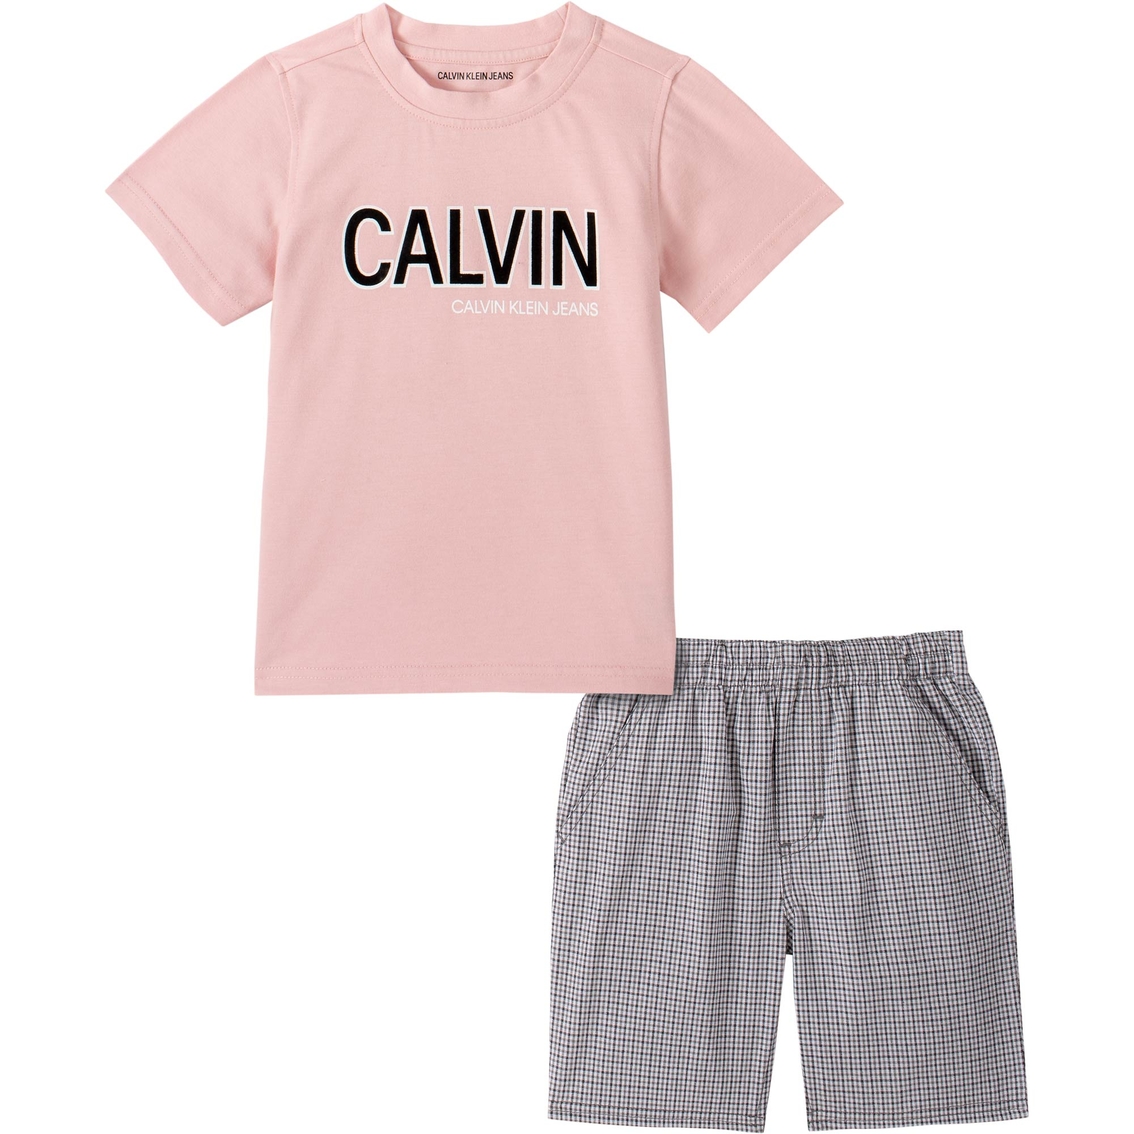 Calvin Klein Toddler Boys Logo Tee And Shorts 2 Pc. Set | Toddler Boys 2t-4t  | Clothing & Accessories | Shop The Exchange